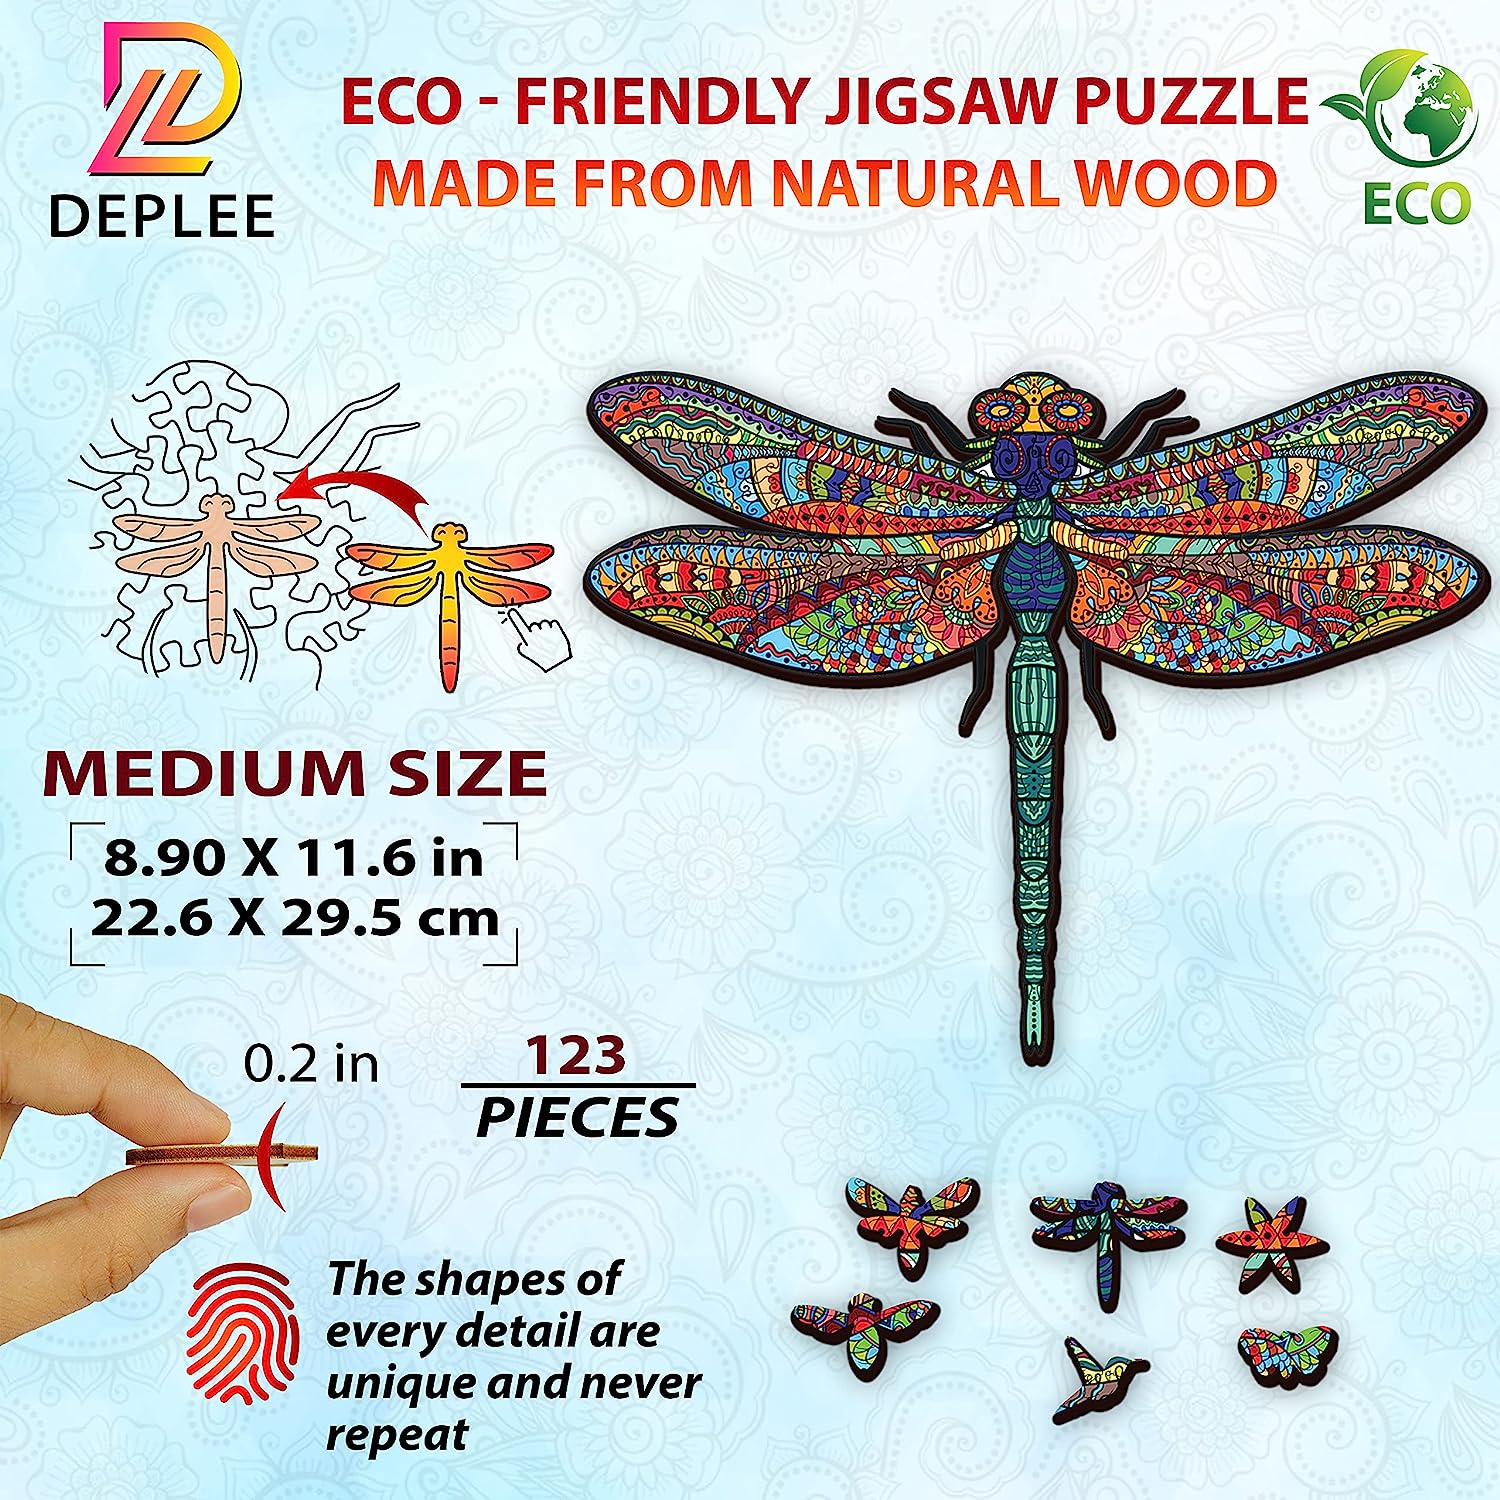 Wooden Puzzles for Adults Dragonfly Wooden Jigsaw Puzzles Unique Shape Wooden Animal Puzzle Creative Challenge for Adults, Family, Friend|119 Pcs – 8.9 x 11.62 in (22.61x29.54cm)- Medium